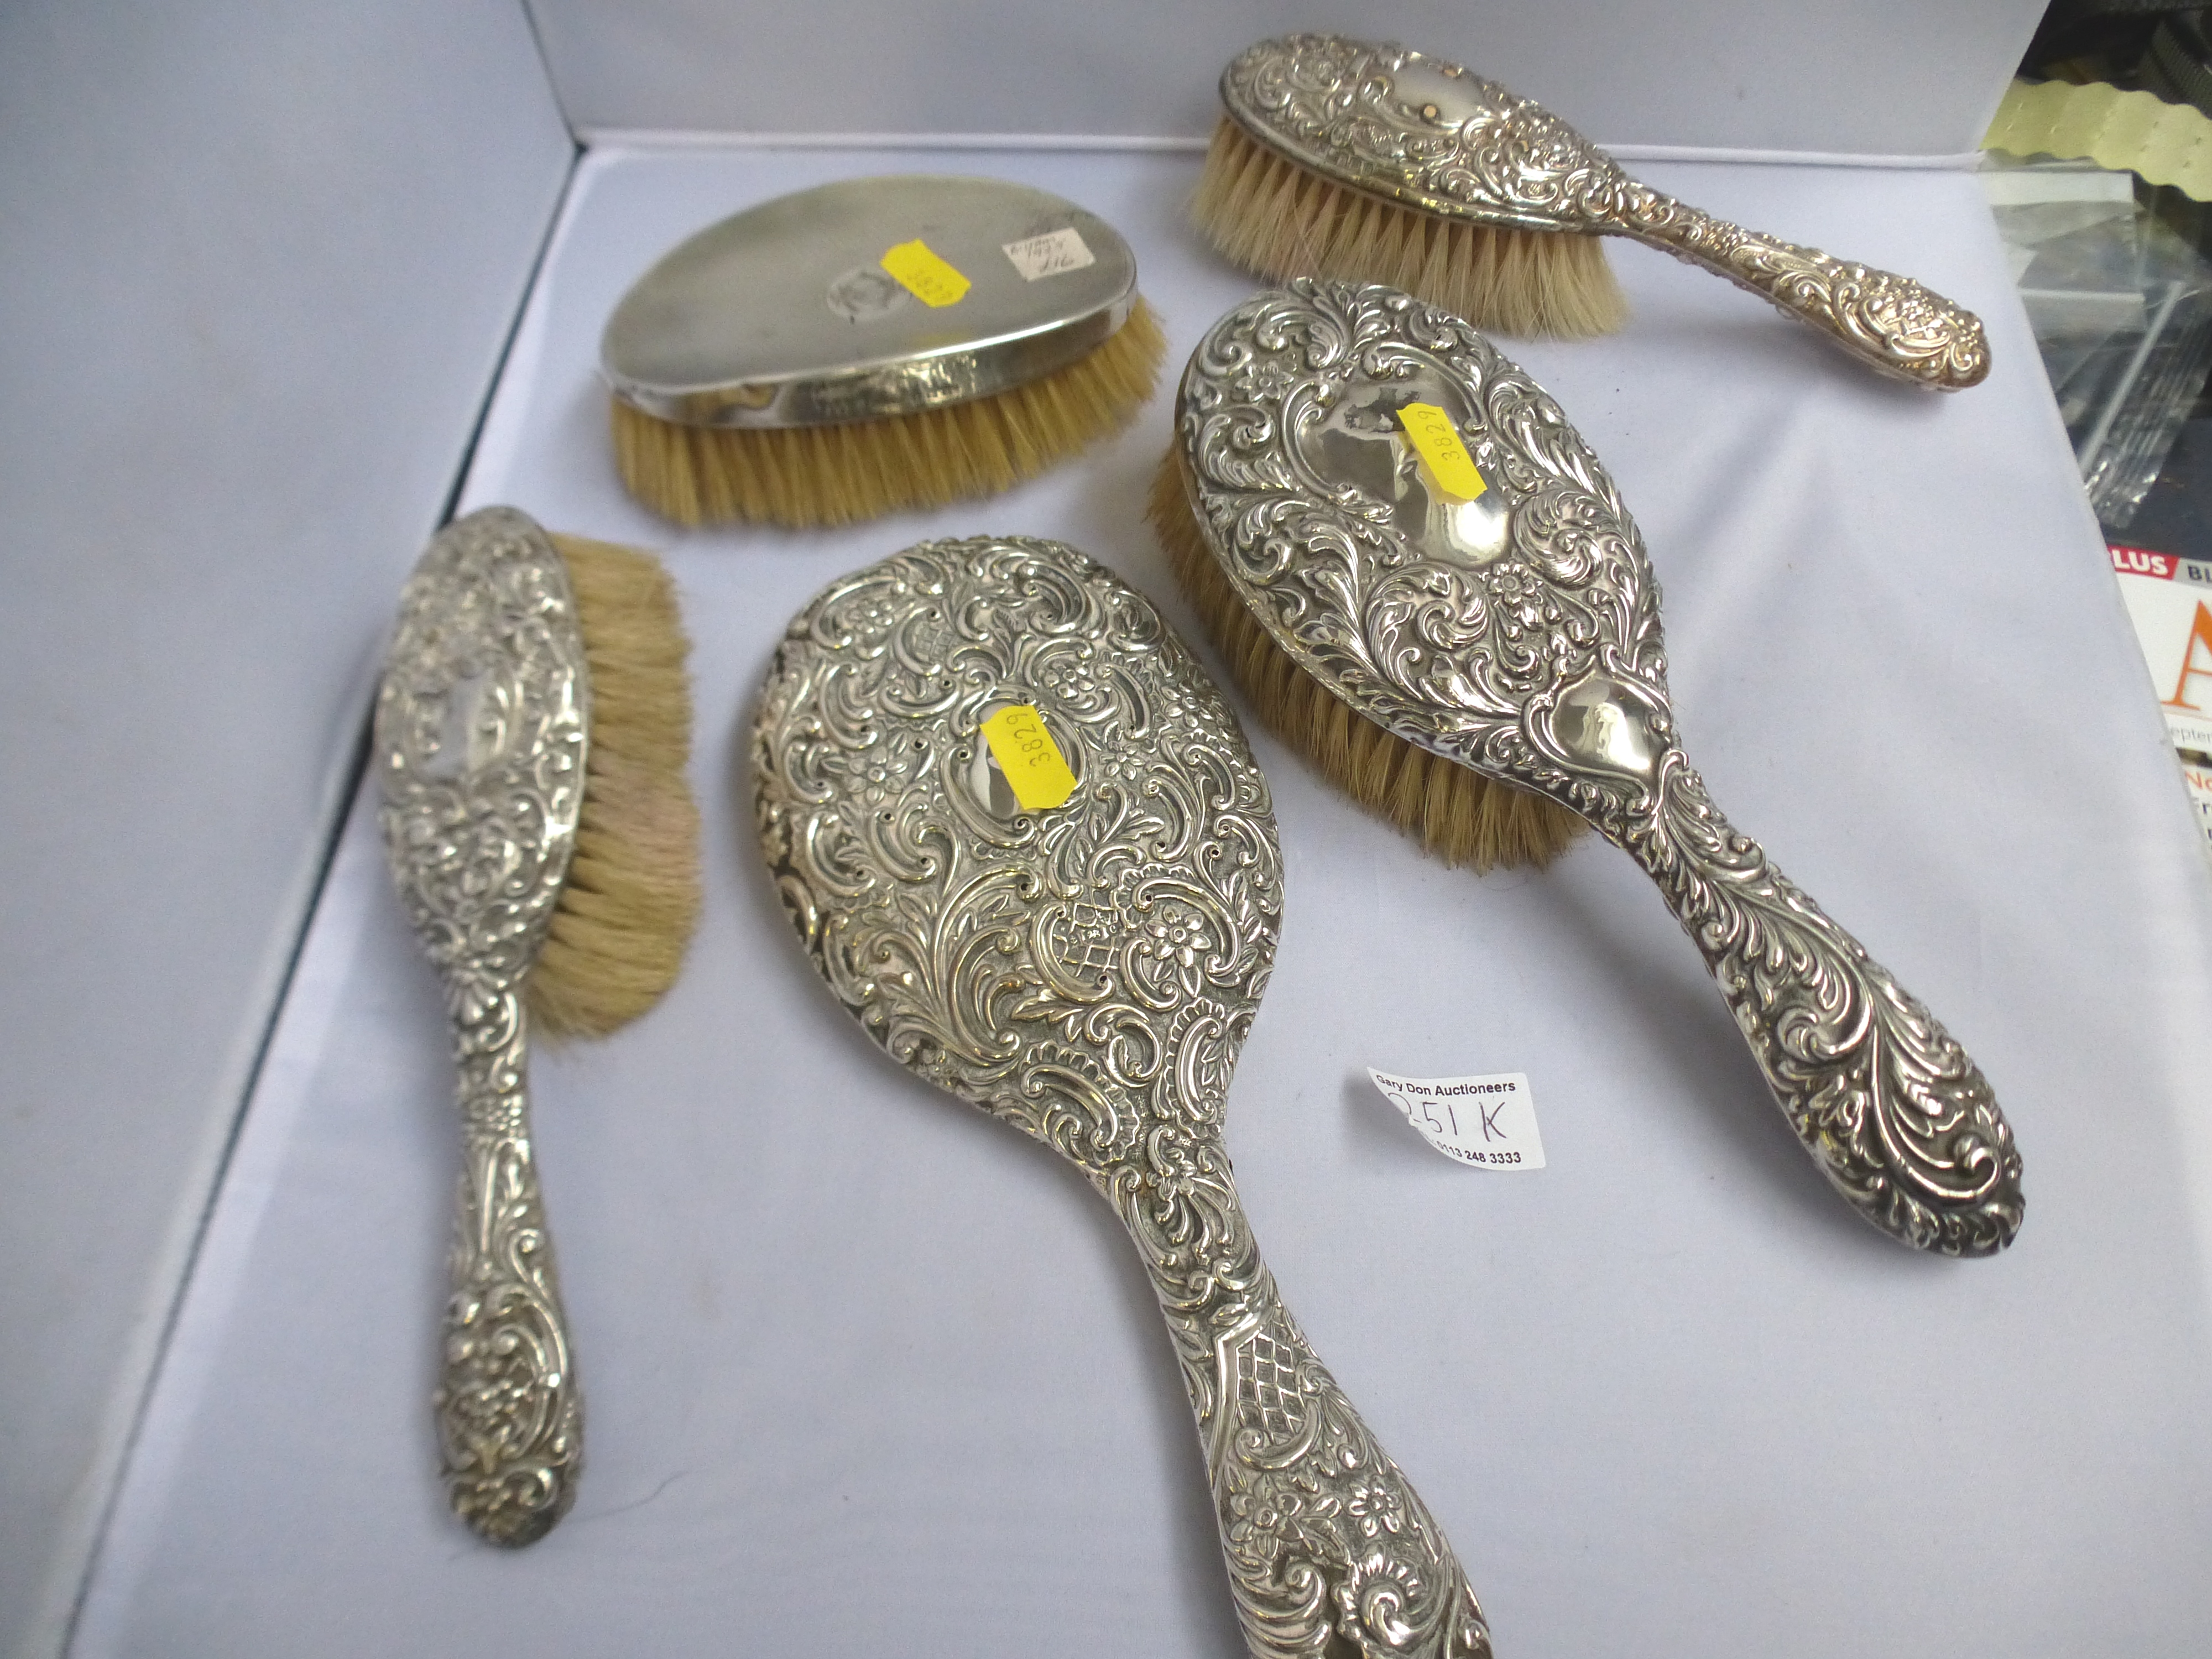 4 SILVER BACK BRUSHES AND A SILVER MIRROR